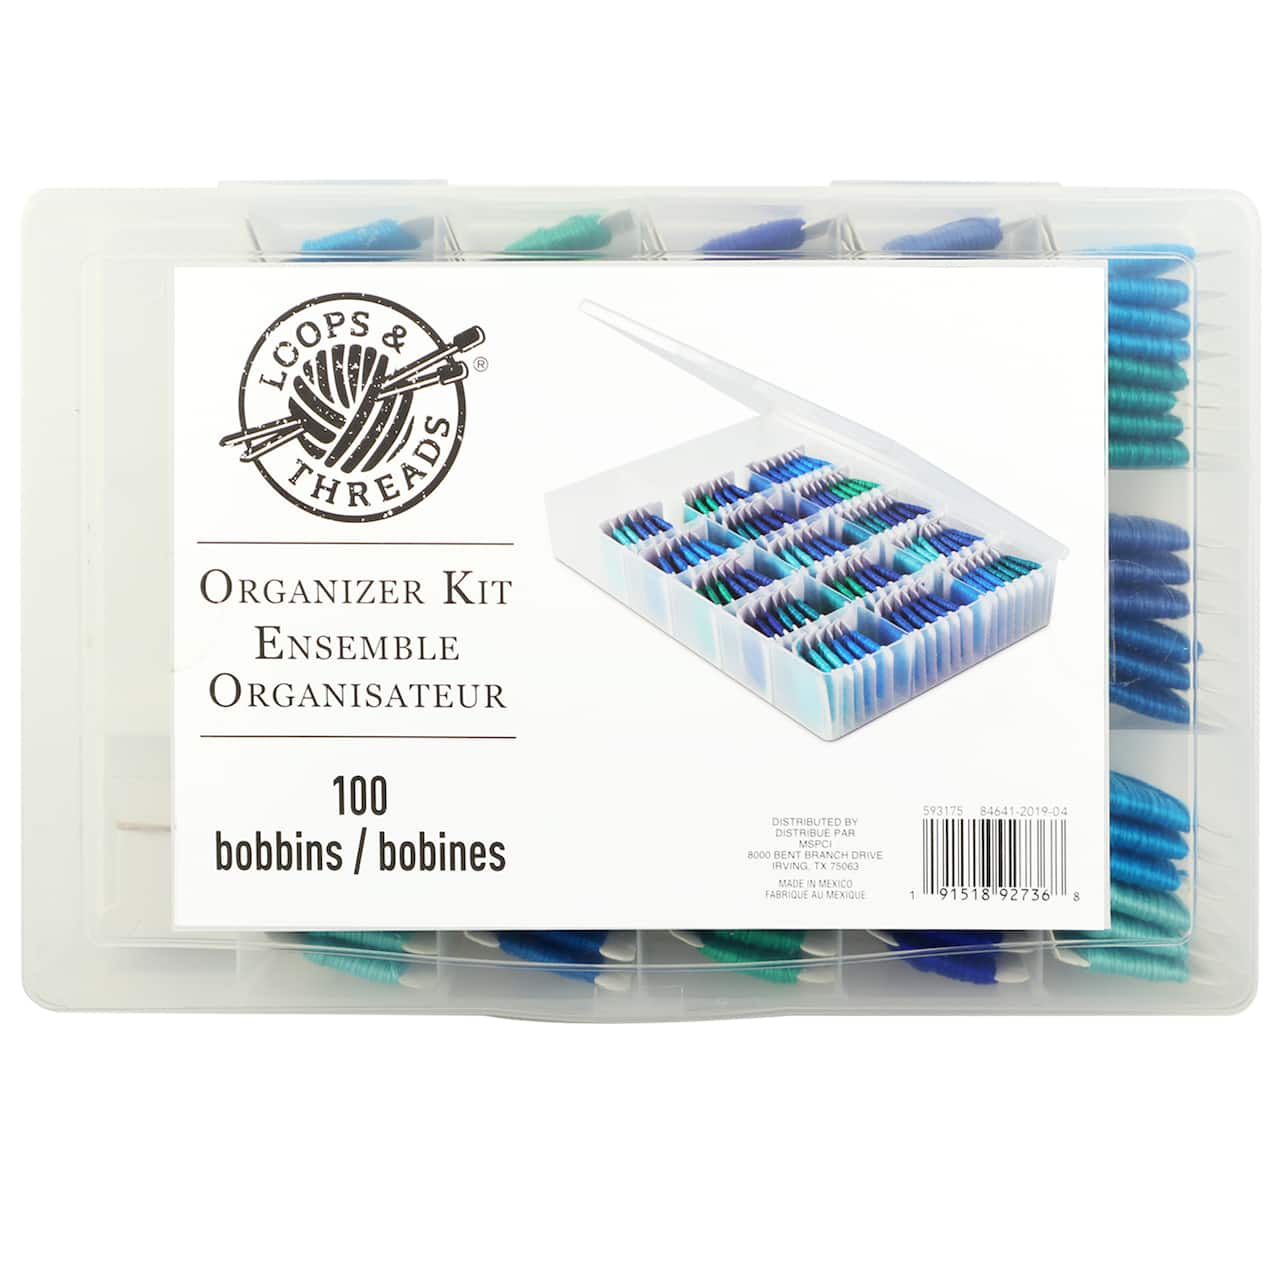 Embroidery Floss Organizer Kit by Loops & Threads®, 100ct.